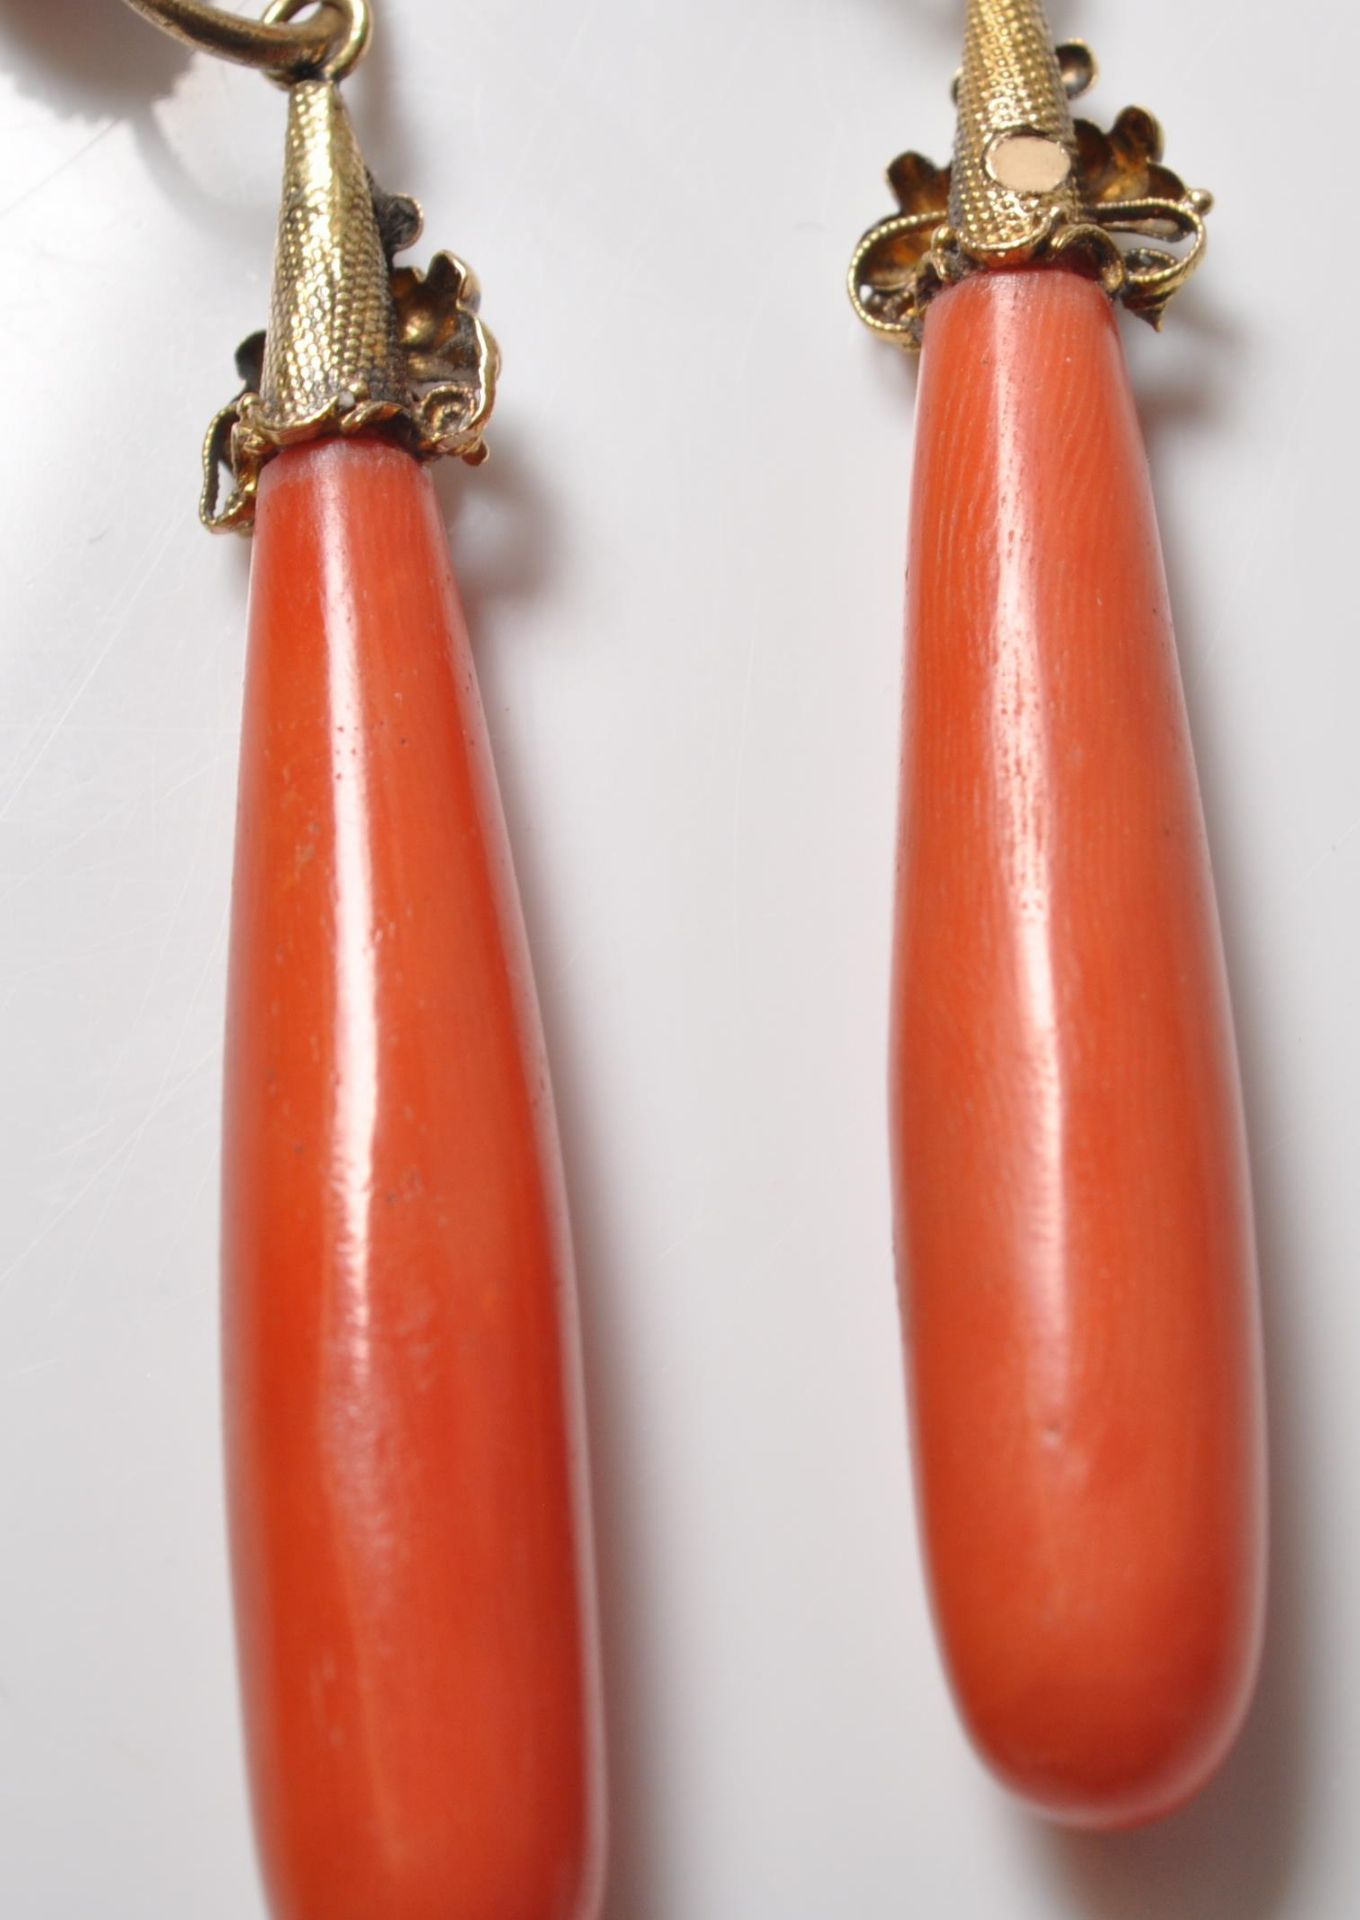 PAIR OF GEORGIAN GOLD AND RED CORAL DROP EARRINGS - Image 5 of 7